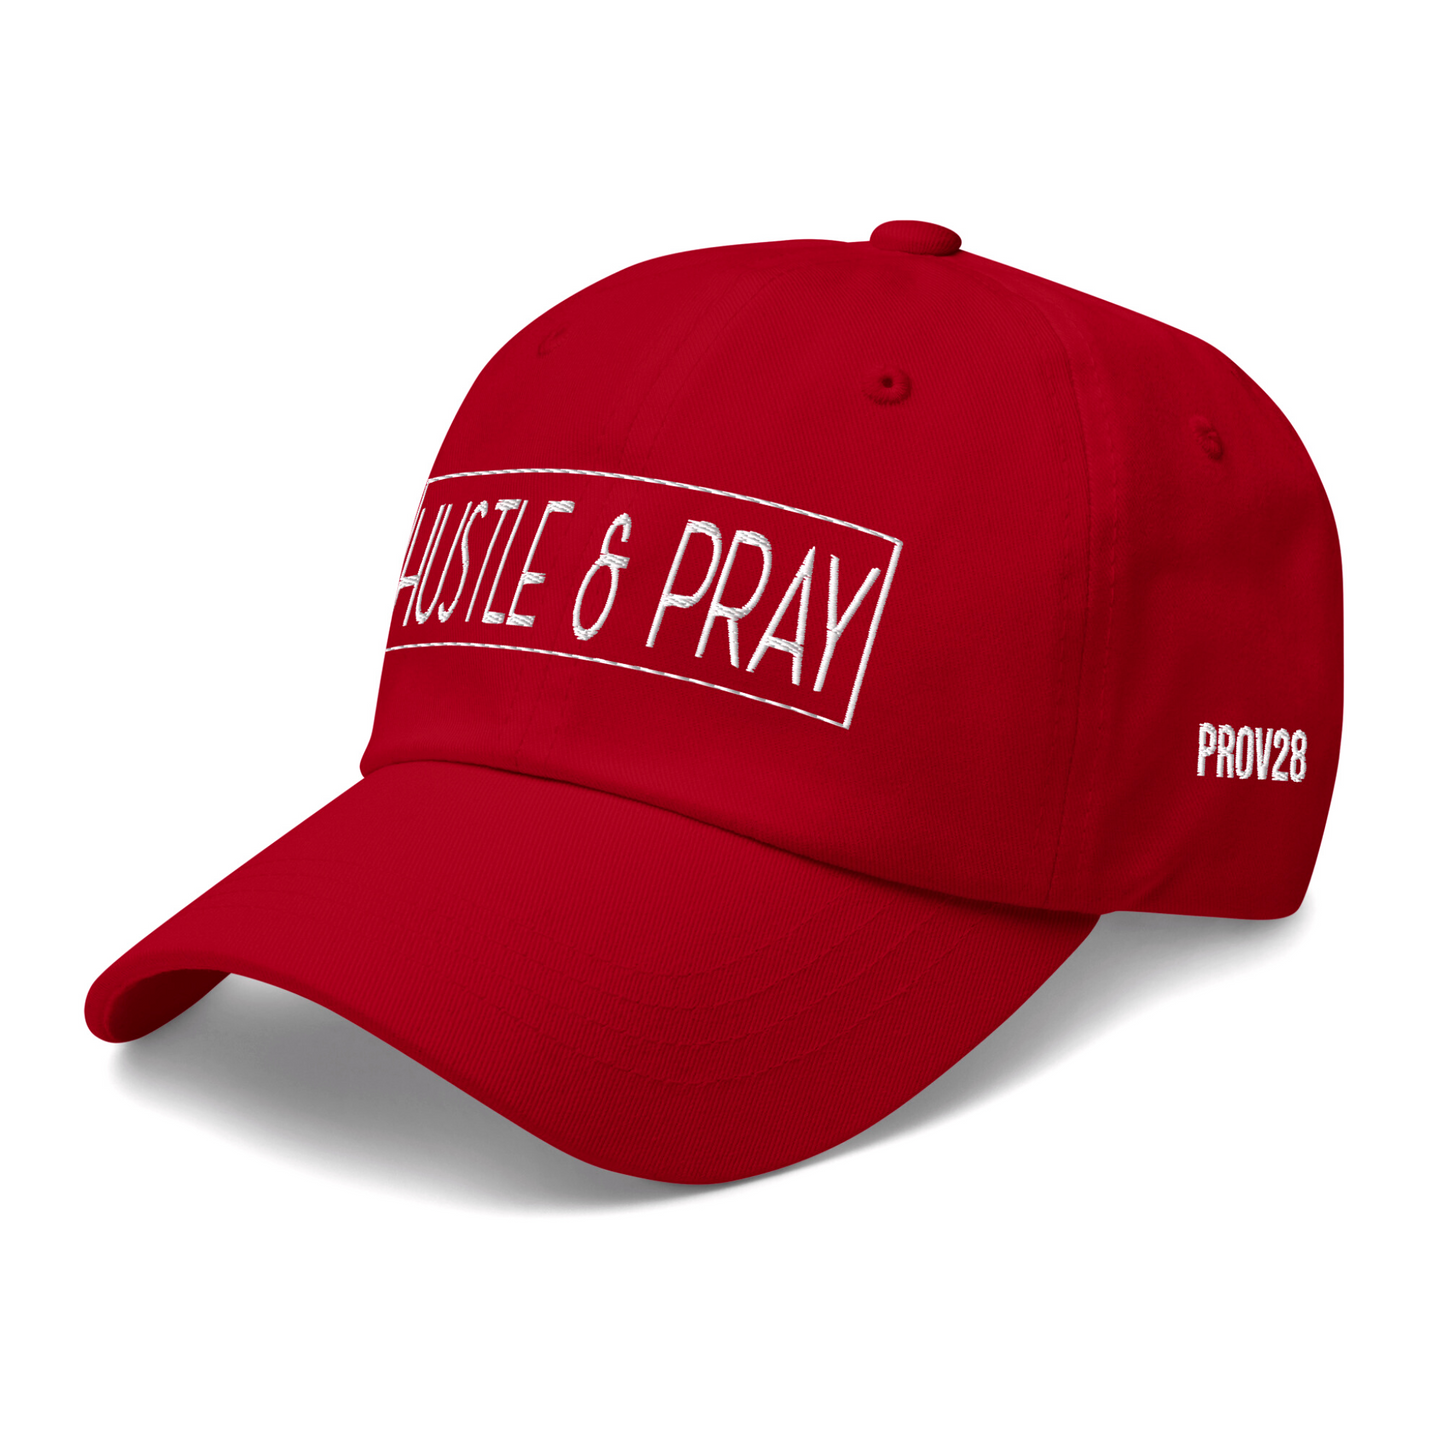 HUSTLE & PRAY - Red & White Embroidered Dad Hat